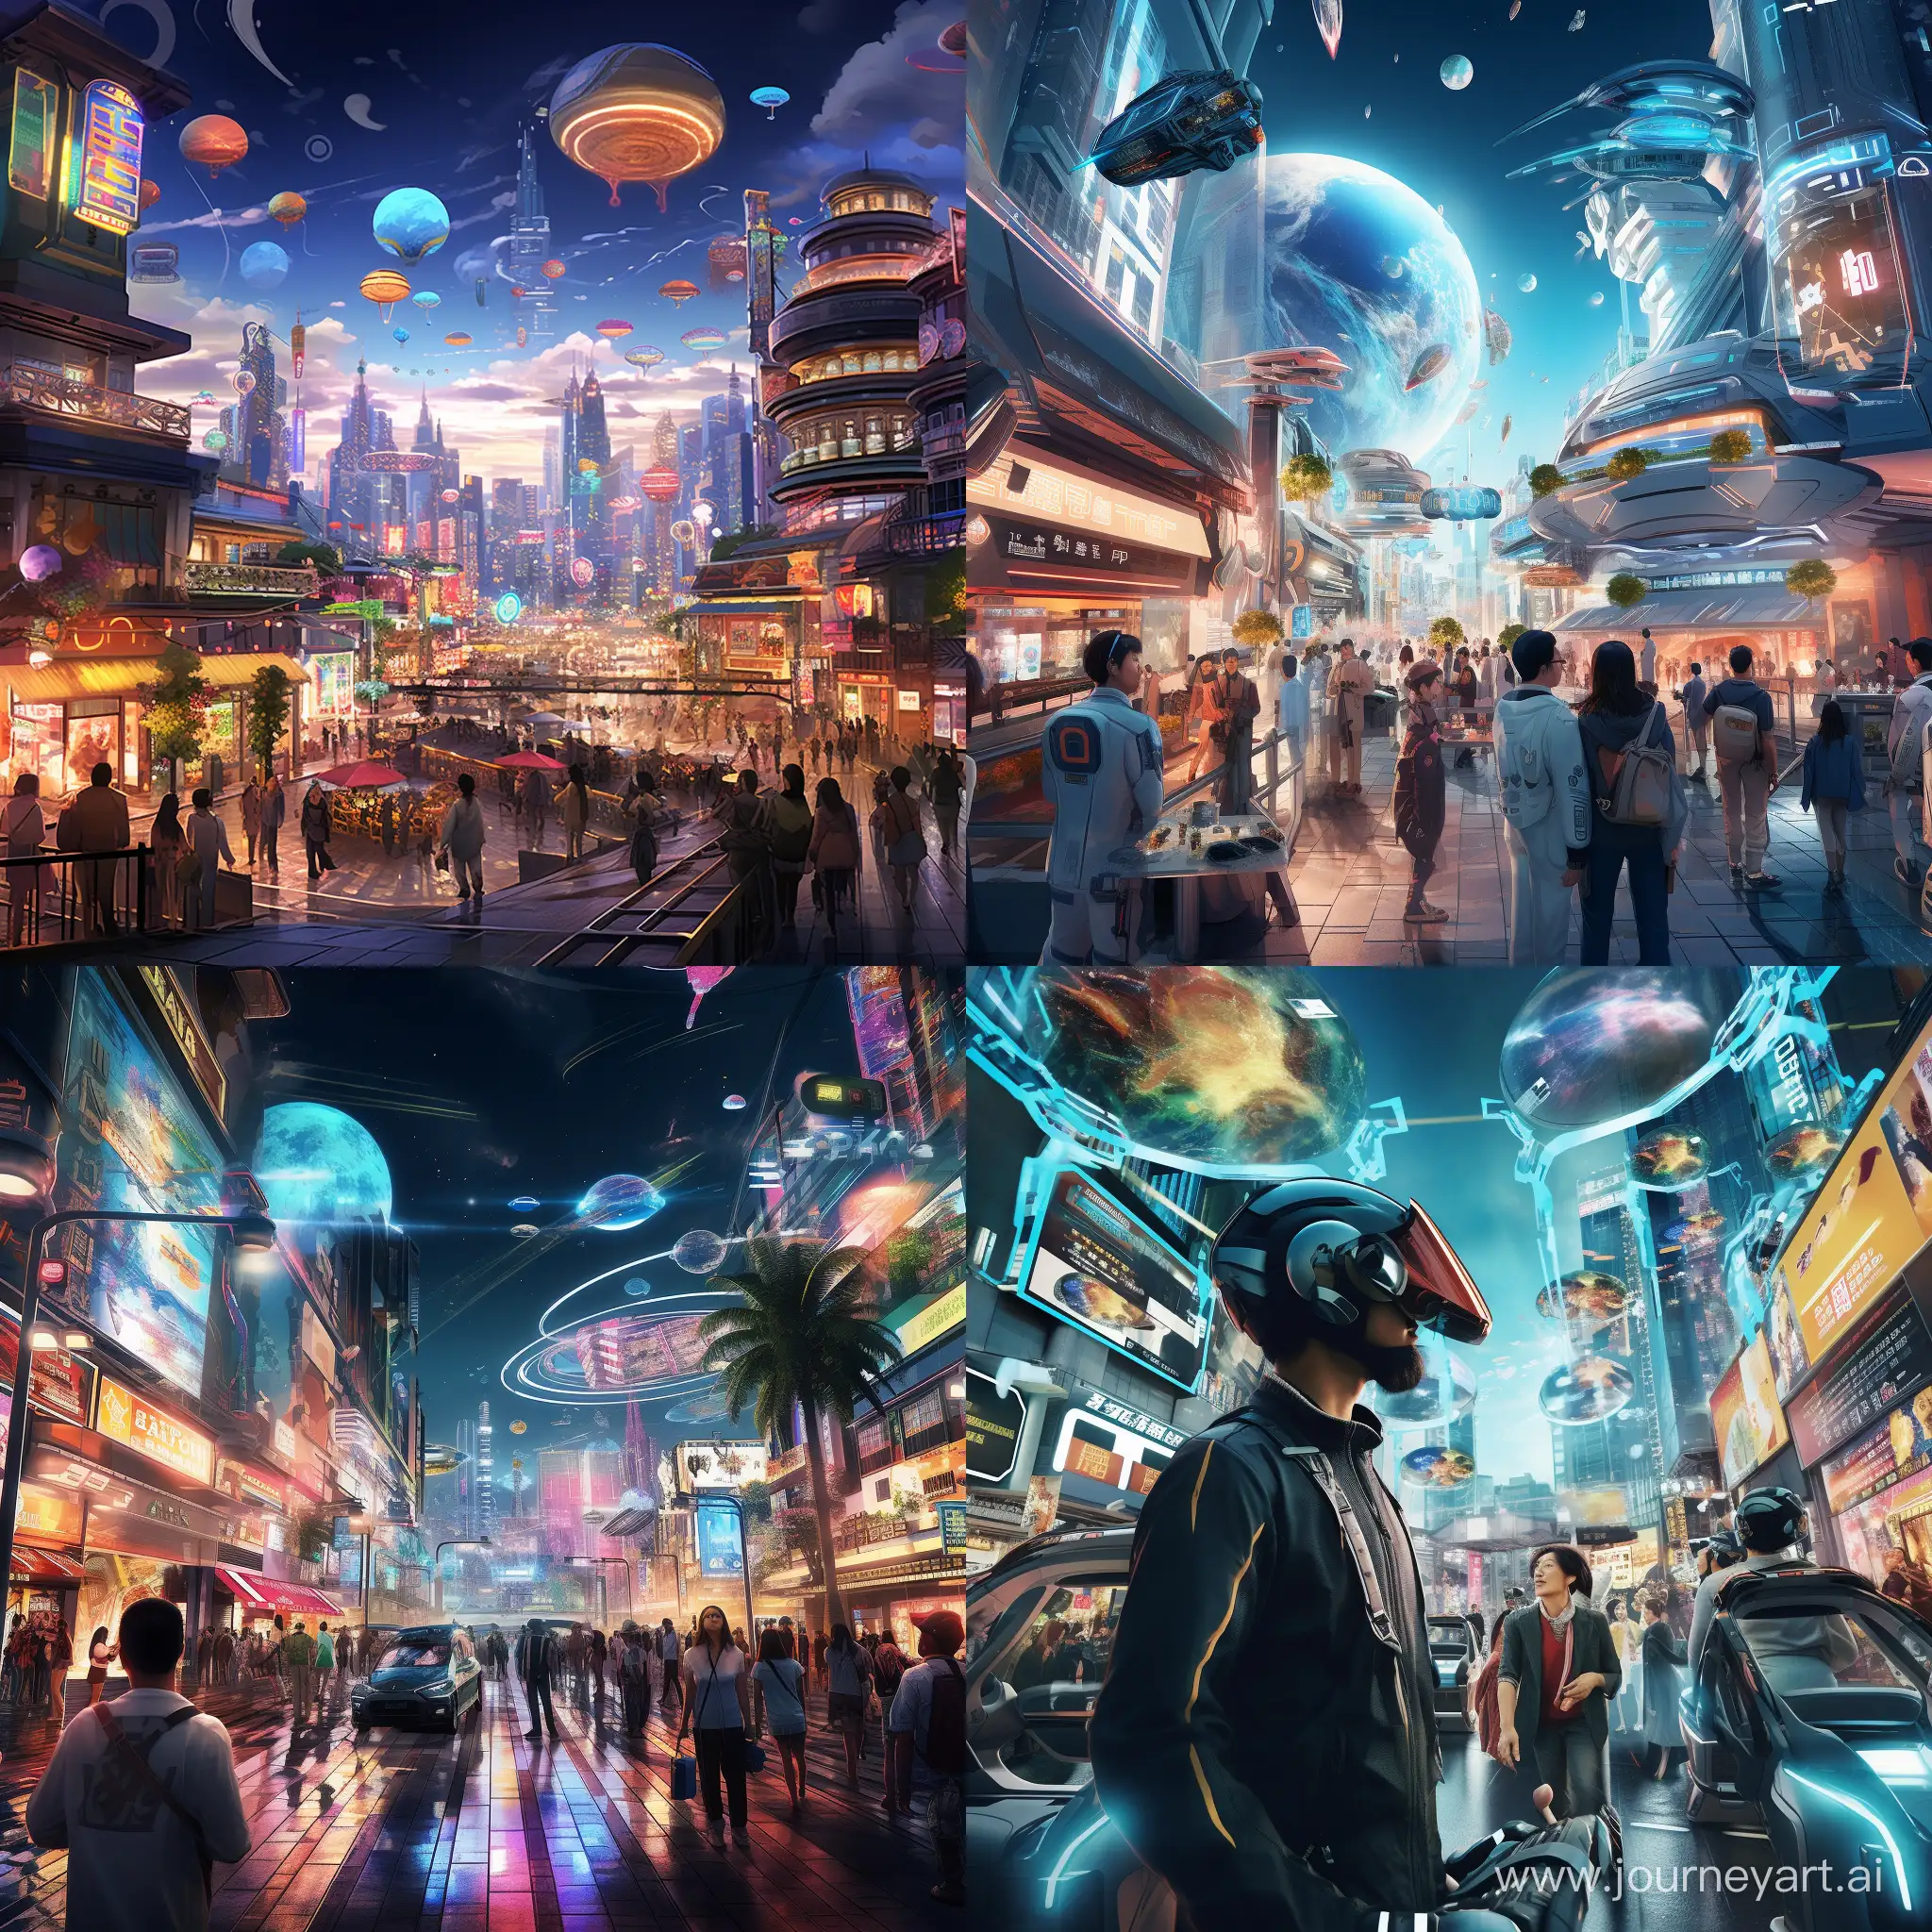 Imagine a bustling, futuristic cityscape at dusk, where the skyline is a mix of neon-lit skyscrapers and traditional pagodas. The streets are filled with a diverse crowd, some in high-tech, cyberpunk attire and others in elegant, historical costumes. Hover cars zip through the air alongside autonomous drones, while street vendors sell exotic, glowing street food. The atmosphere is electric, with a blend of ancient traditions and cutting-edge technology, under a sky transitioning from a brilliant sunset to a starlit night